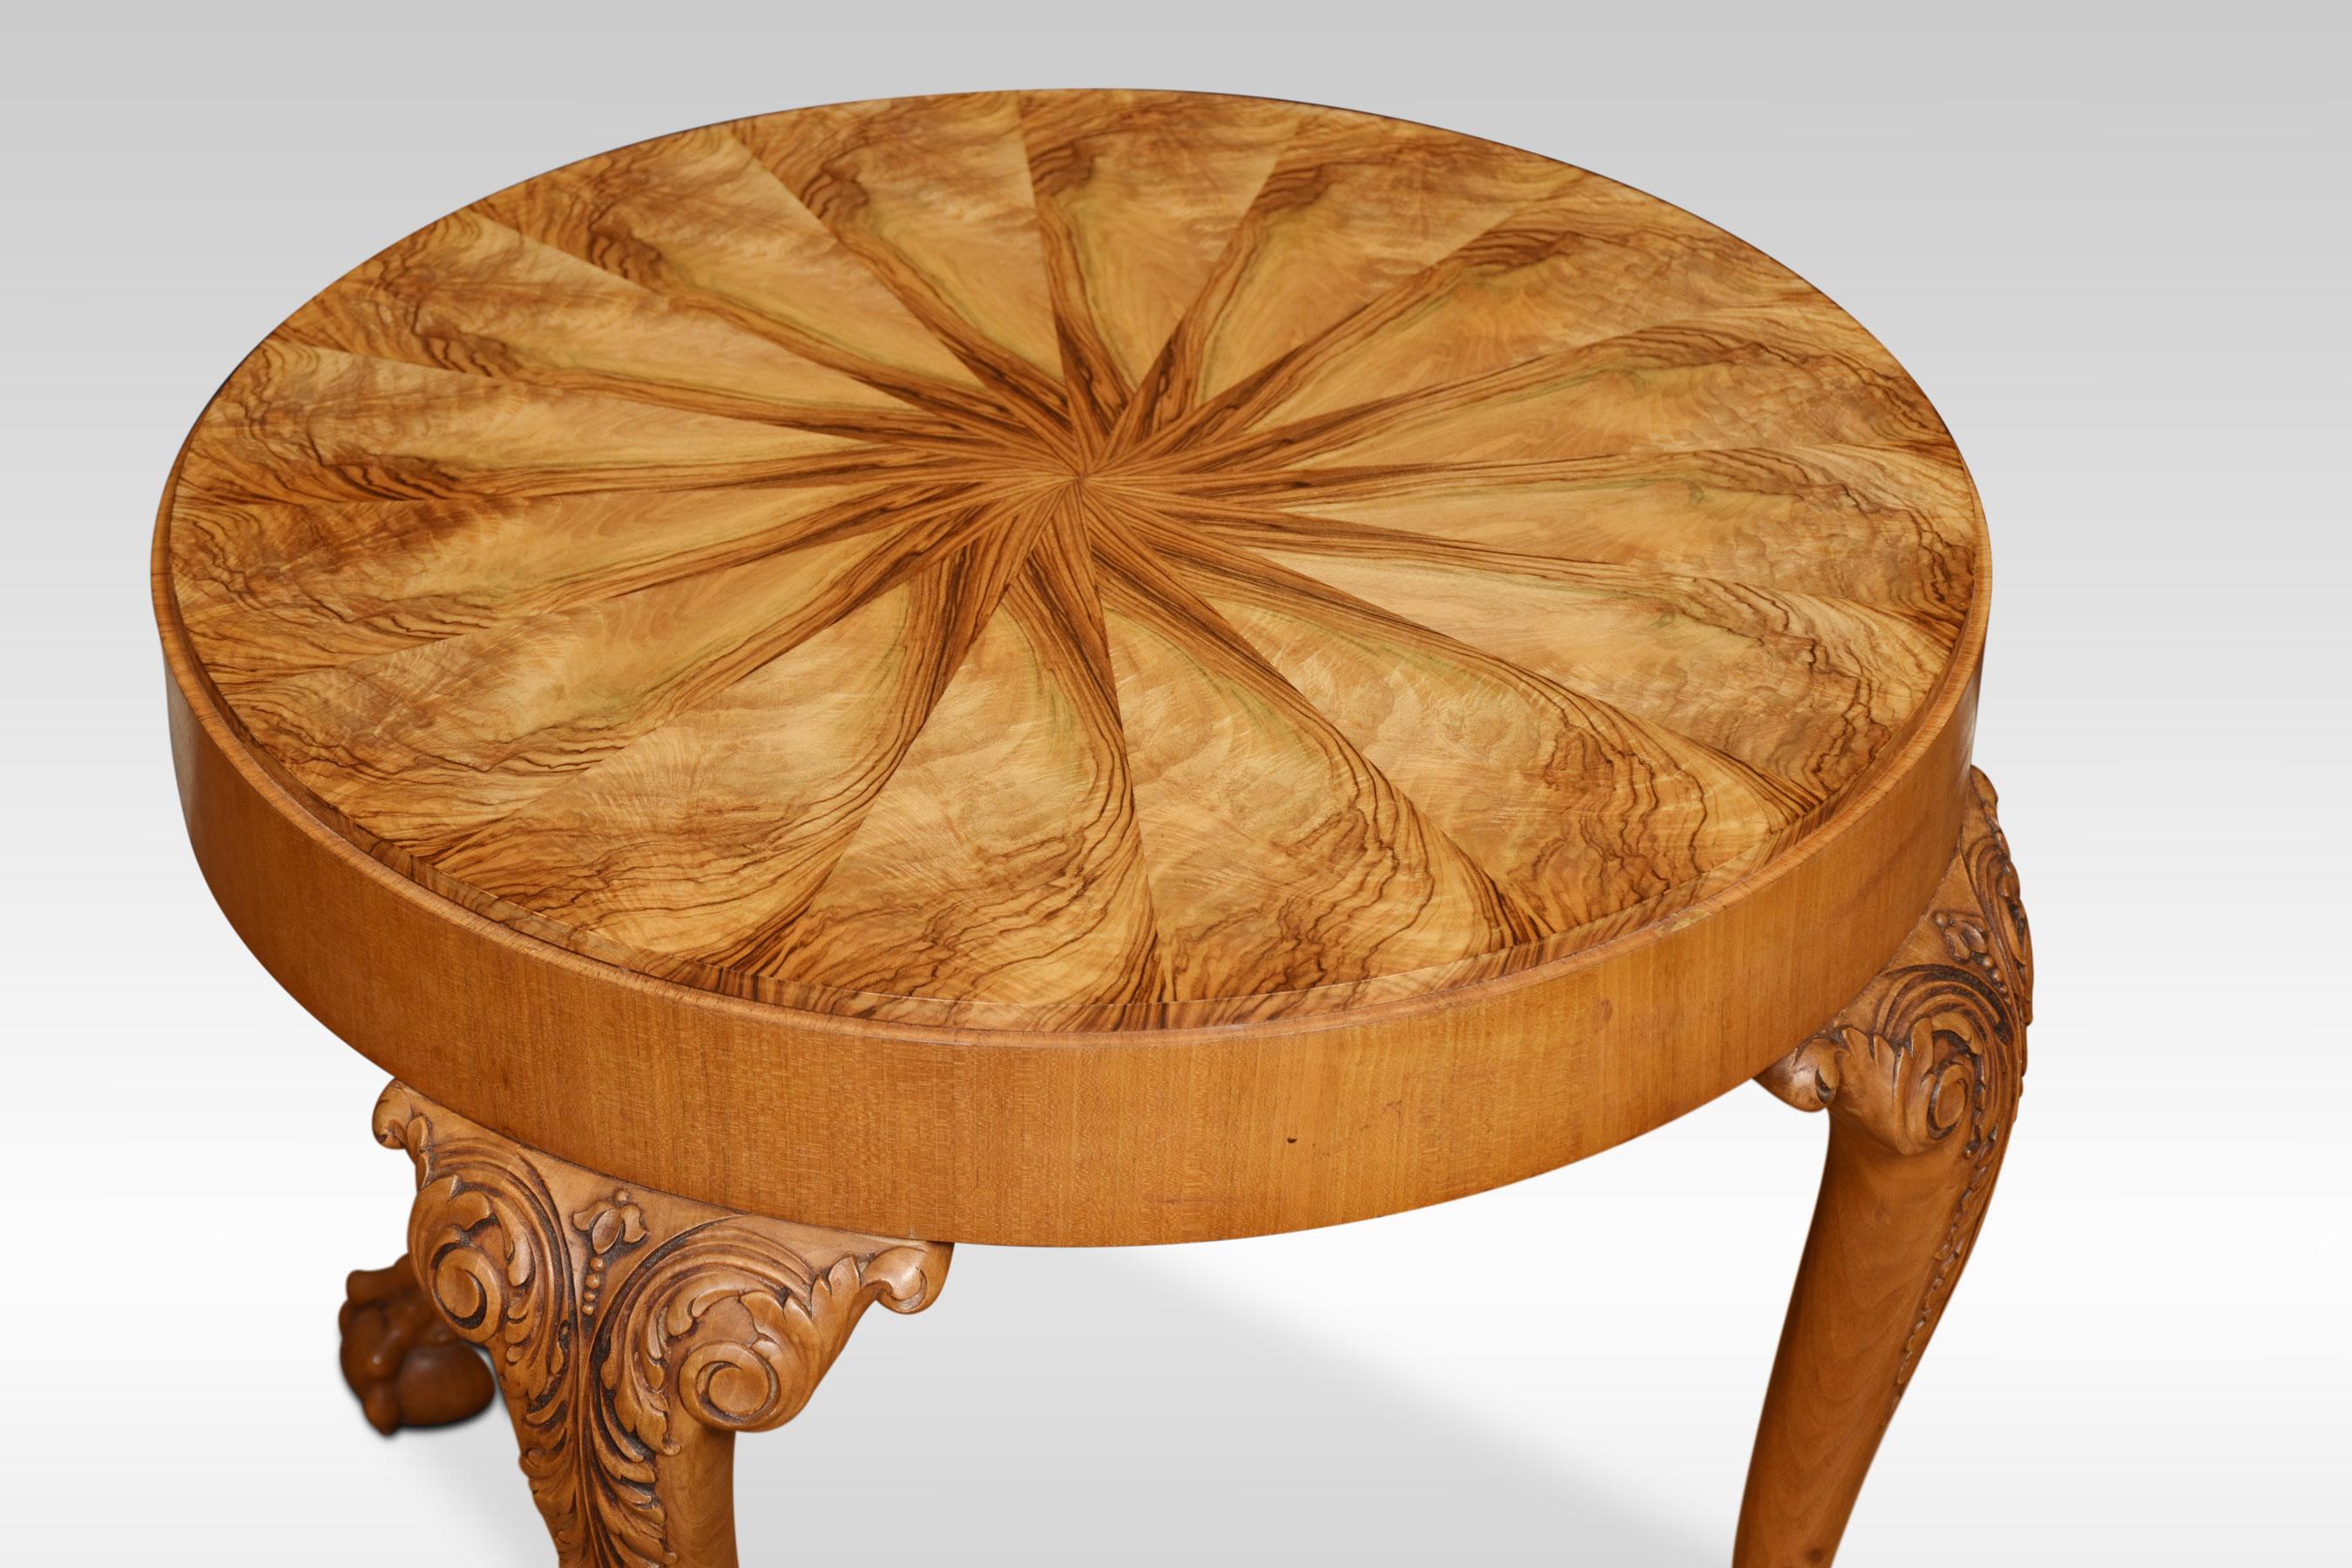 Walnut coffee table the circular well figured top raised up on four carved cabriole legs terminating in claw and ball feet.
Dimensions
Height 21.5 inches
Width 27 inches
Depth 27 inches.